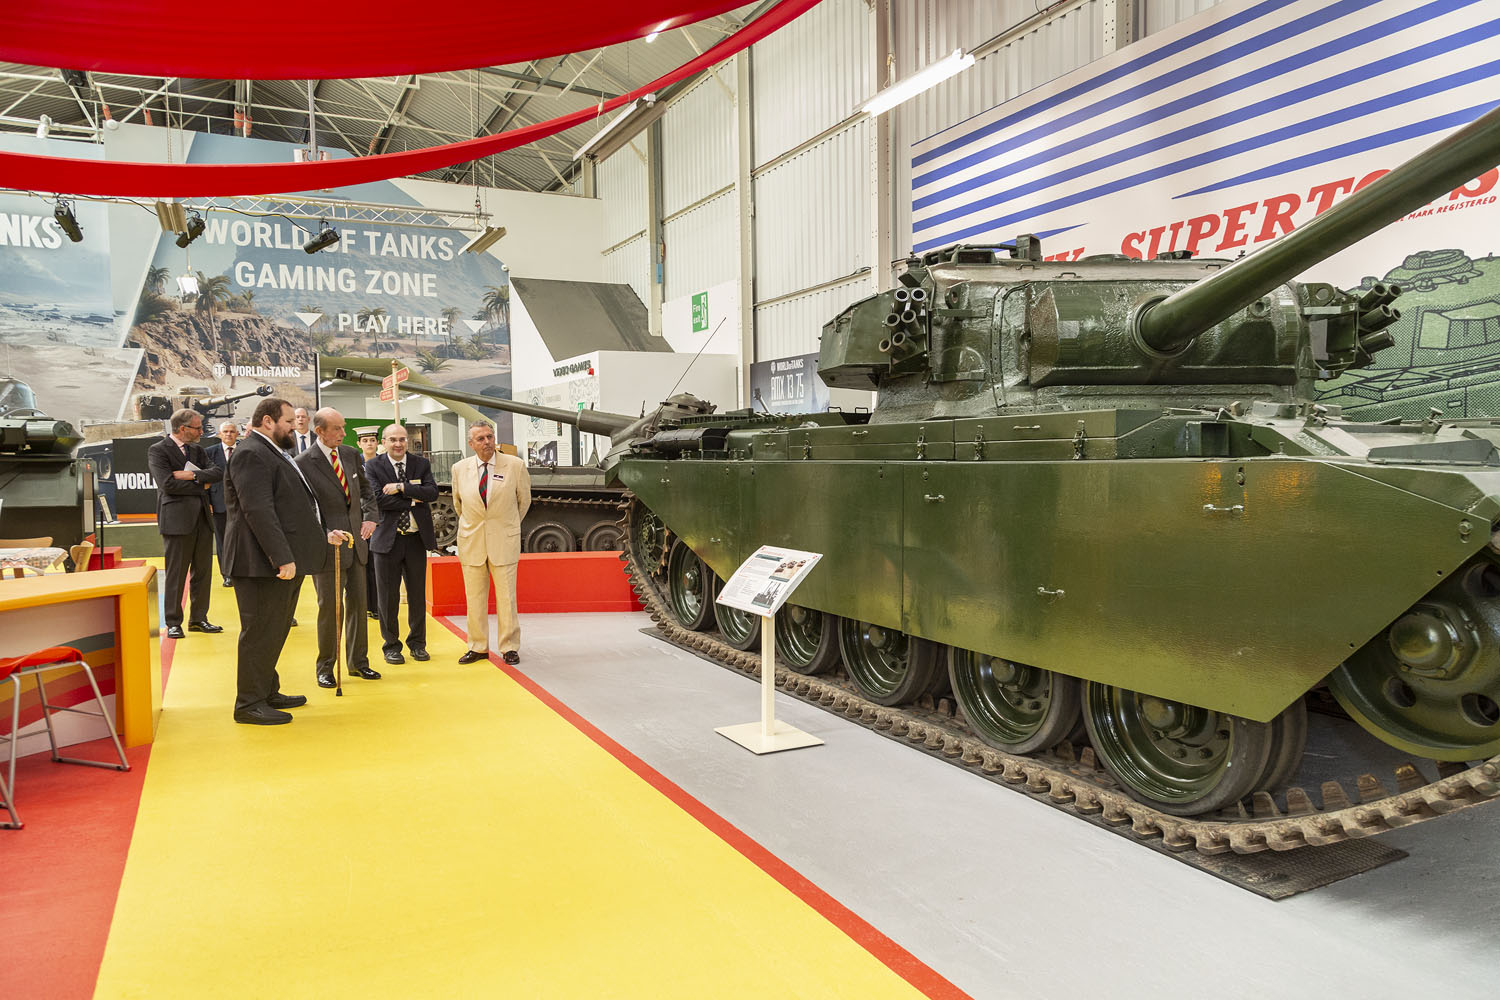 The Duke was reunited with a Centurion tank